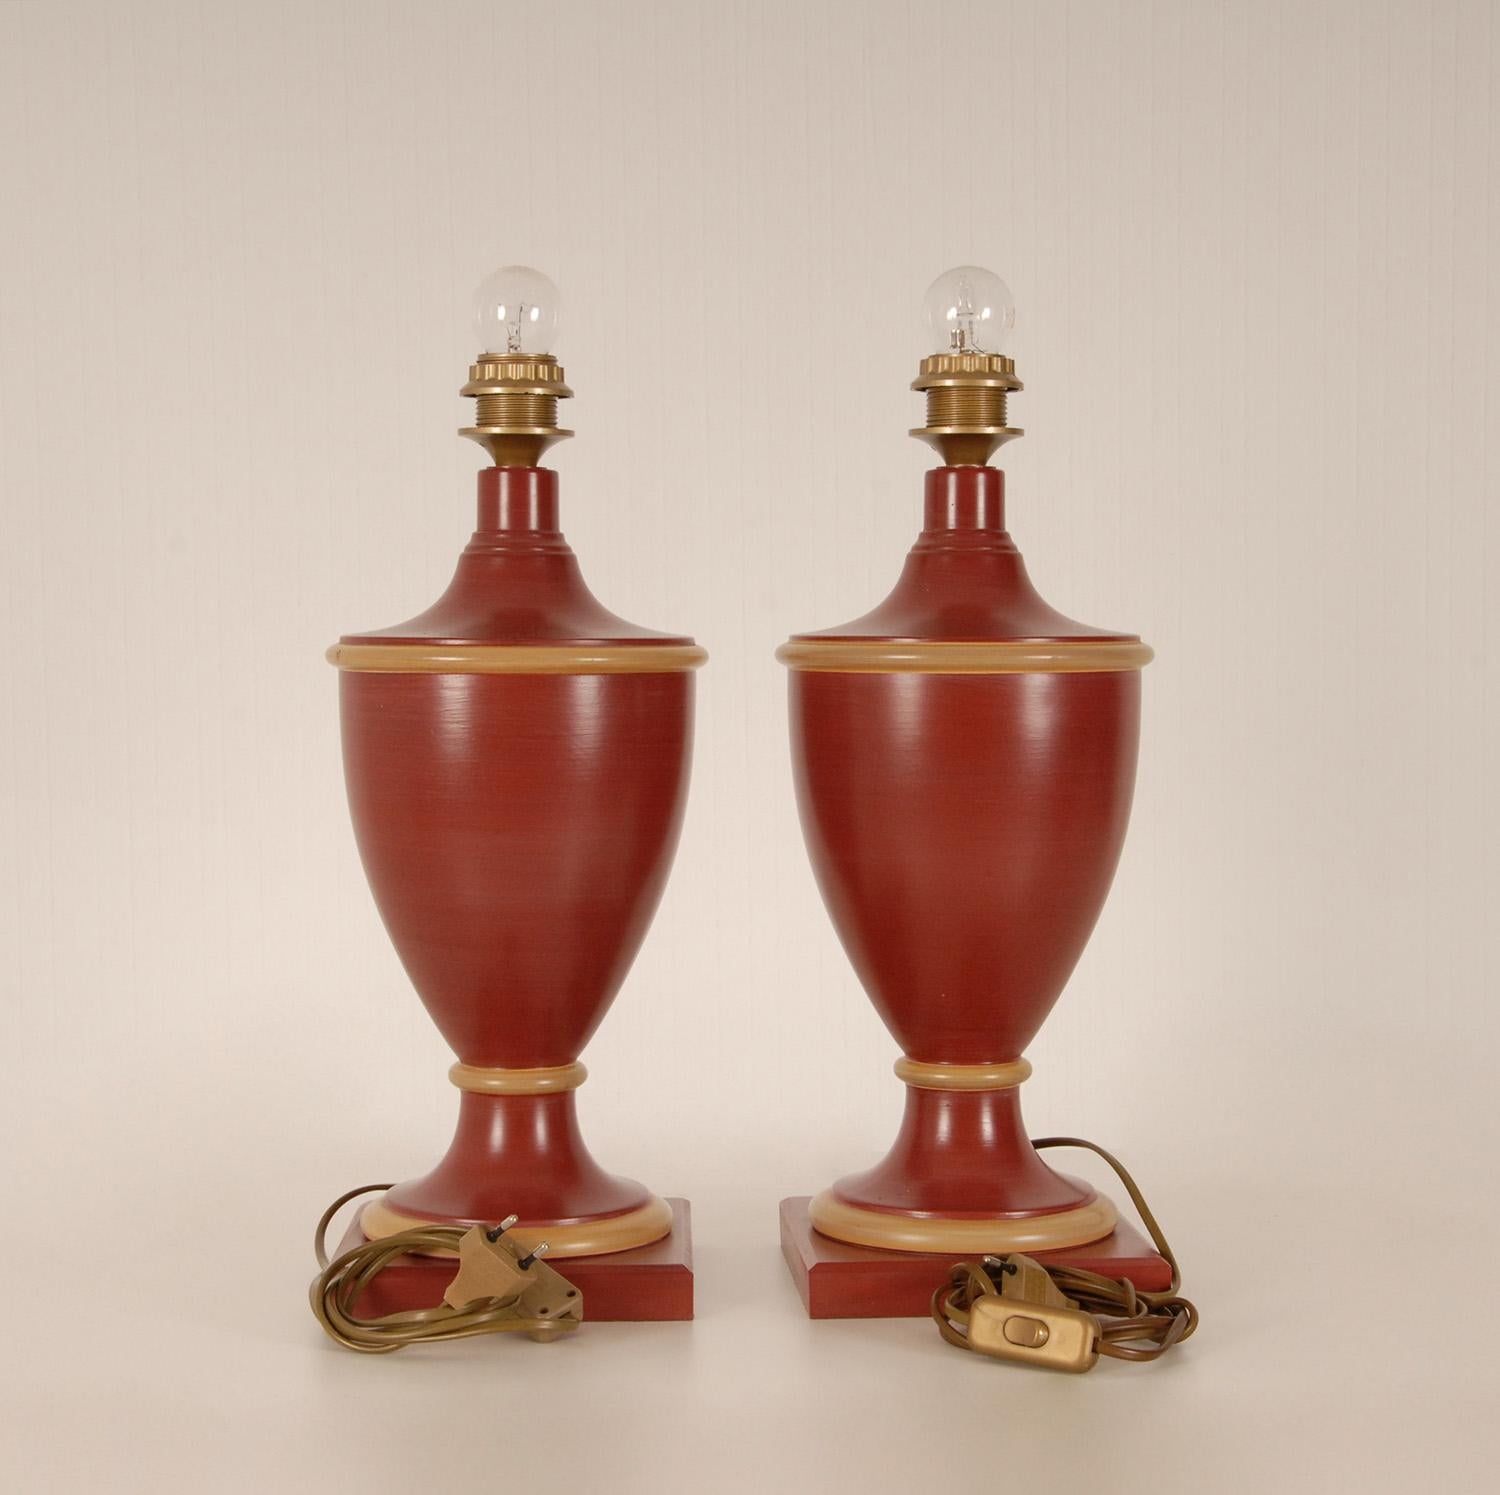 Porcelain Vintage French Ceramic Burgundy Red Table Lamps Buffet Vase Lamps, a Pair